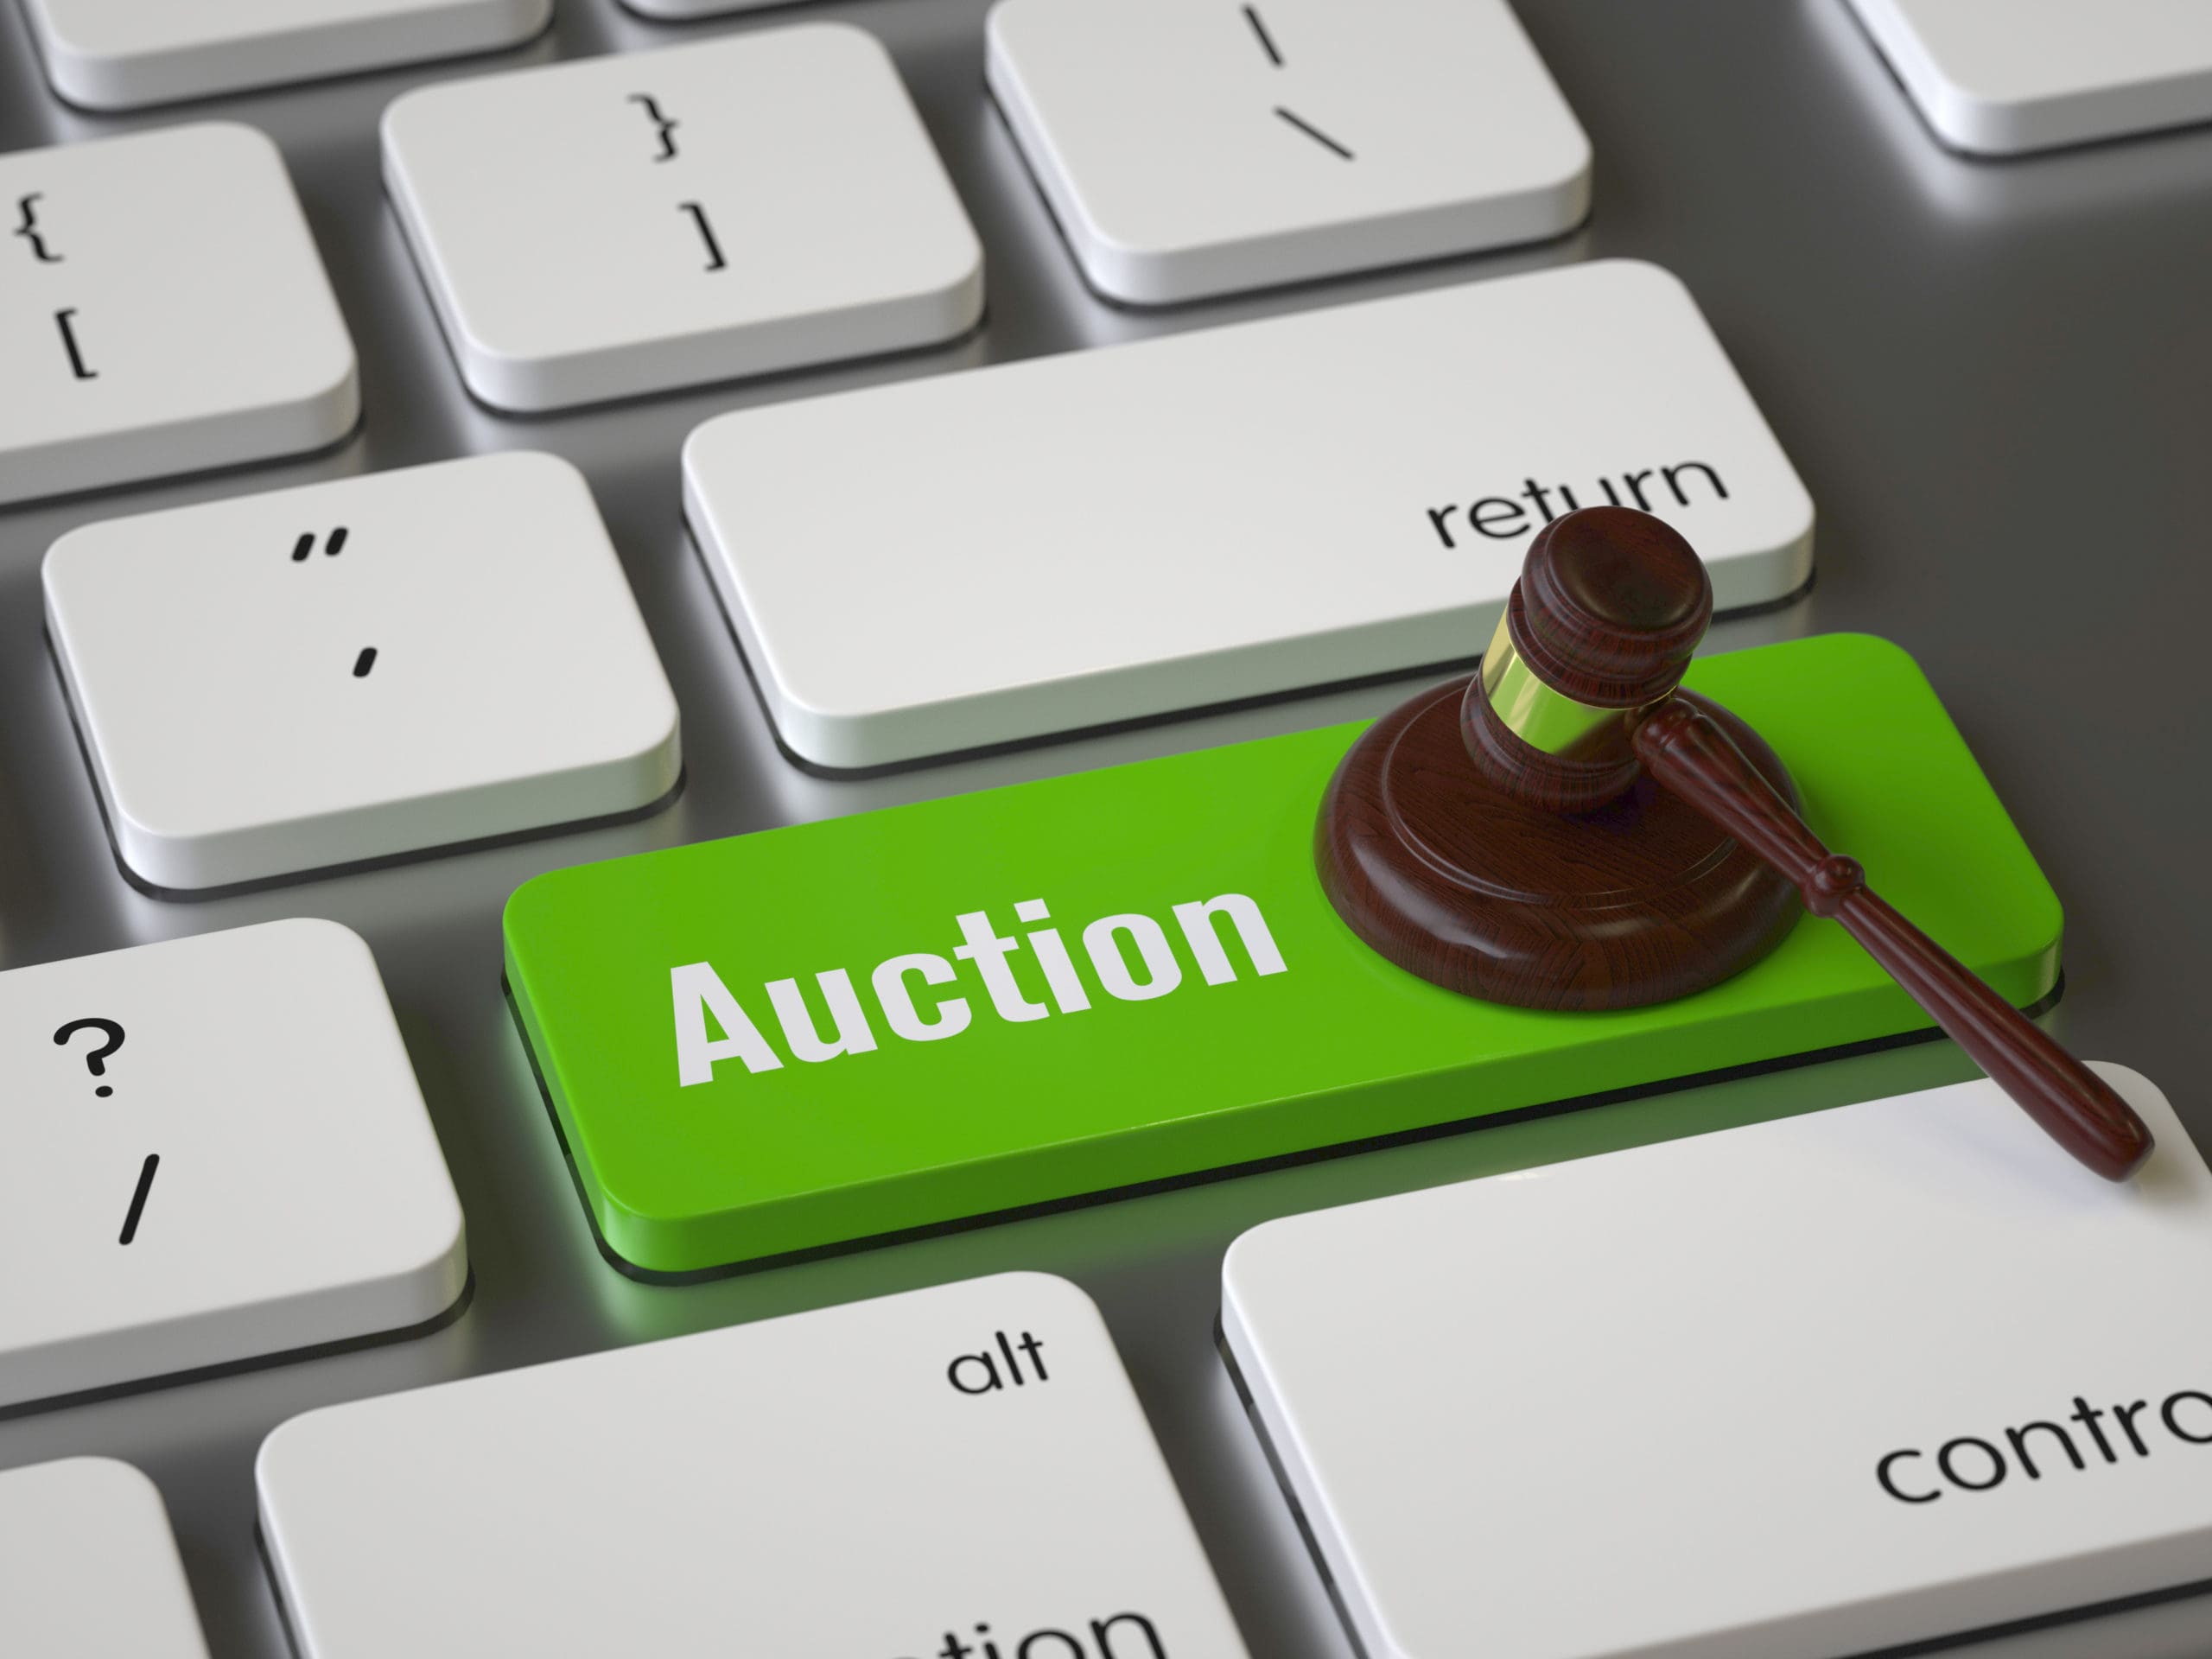 gavel hitting an auction button on a keyboard